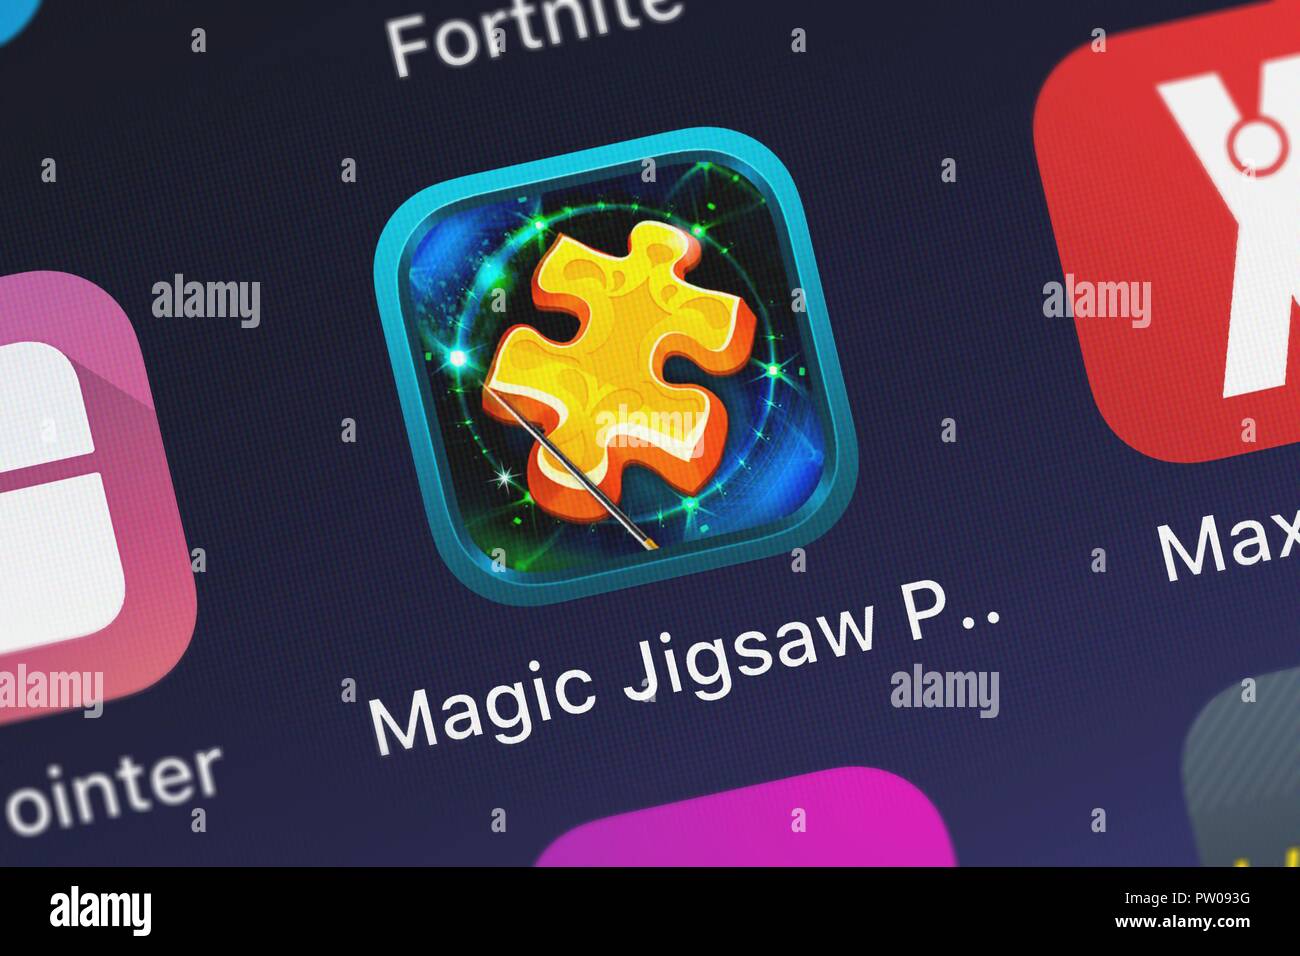 London, United Kingdom - October 11, 2018: The Magic Jigsaw Puzzles mobile  app from ZiMAD on an iPhone screen Stock Photo - Alamy